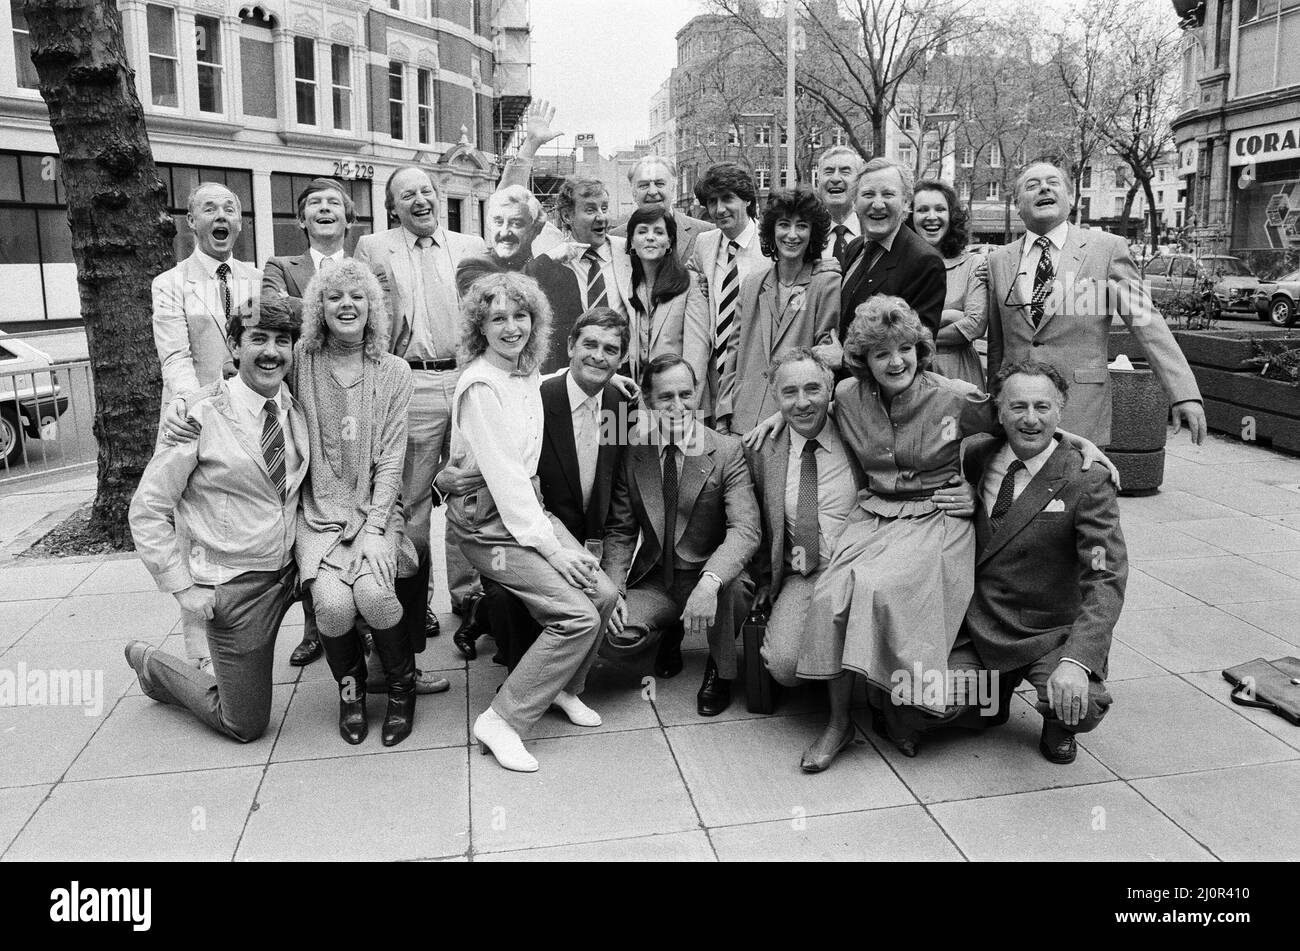 A group of top actors and actresses have grouped together with Ray Cooney at the Shaftesbury Theatre to form the Theatre of Comedy. Today they went along to the Theatre to tell the press. Pictured includes: Leslie Phillips, John Alderton, Richard Briers, Derek Nimmo, Geoffrey Palmer, Tom Conti, Pauline Collins, Julia McKenzie, Tom Courtenay, Maureen Lipman, Liza Goddard and a cardboard cut out of Bernard Cribbins, who could not make it in person. 8th May 1983. Stock Photo